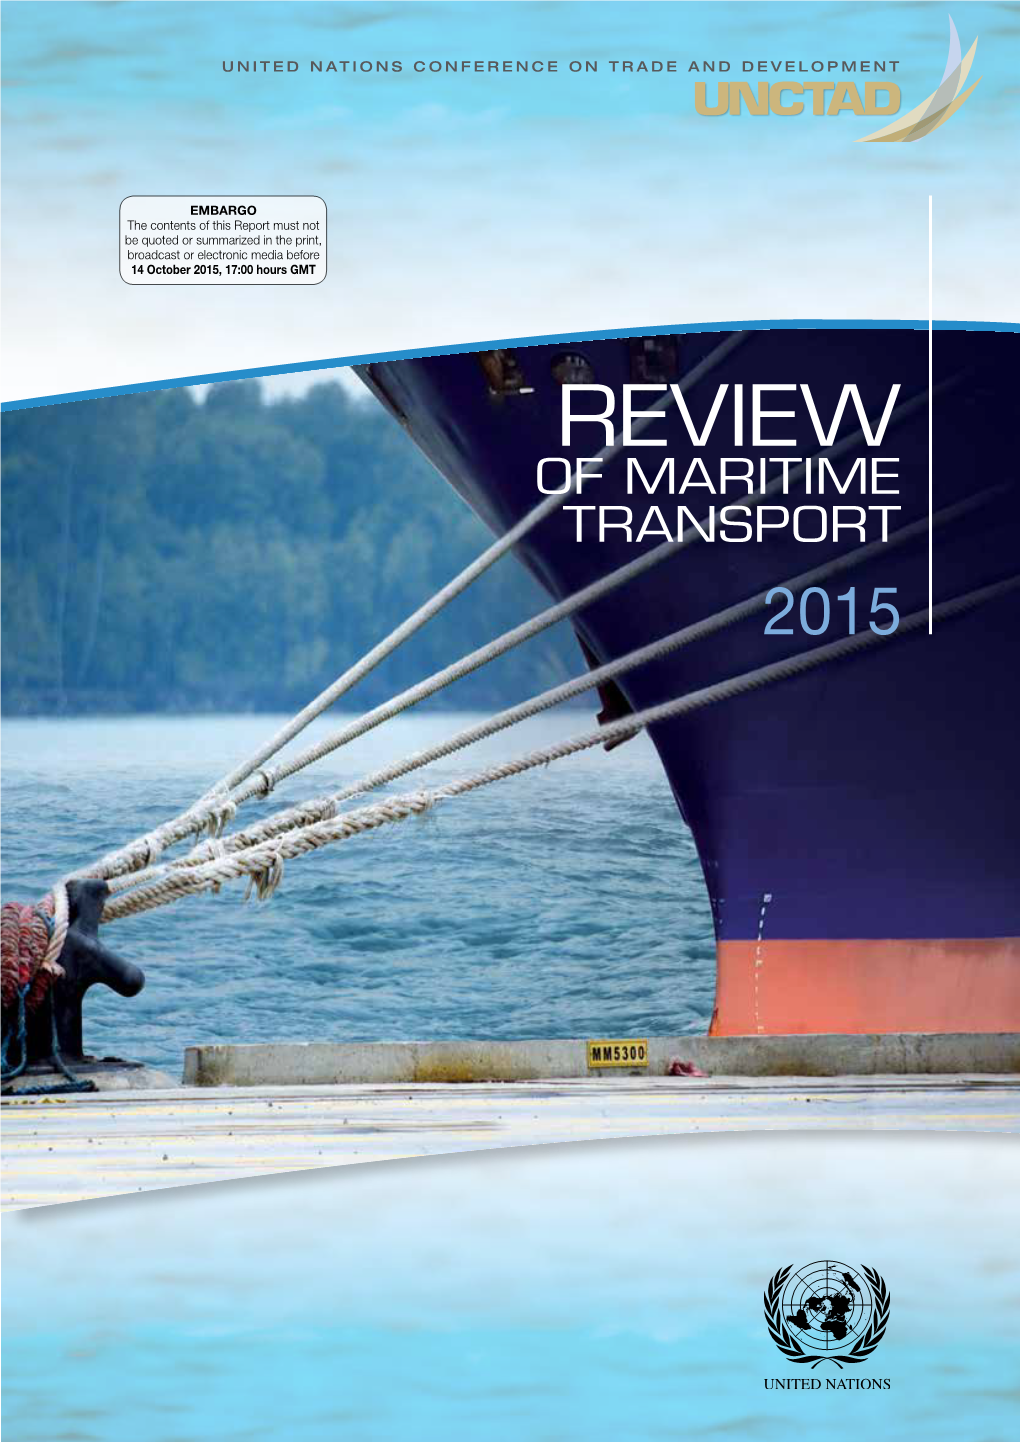 Review of Maritime Transport 2015 UNITED NATIONS CONFERENCE on TRADE and DEVELOPMENT